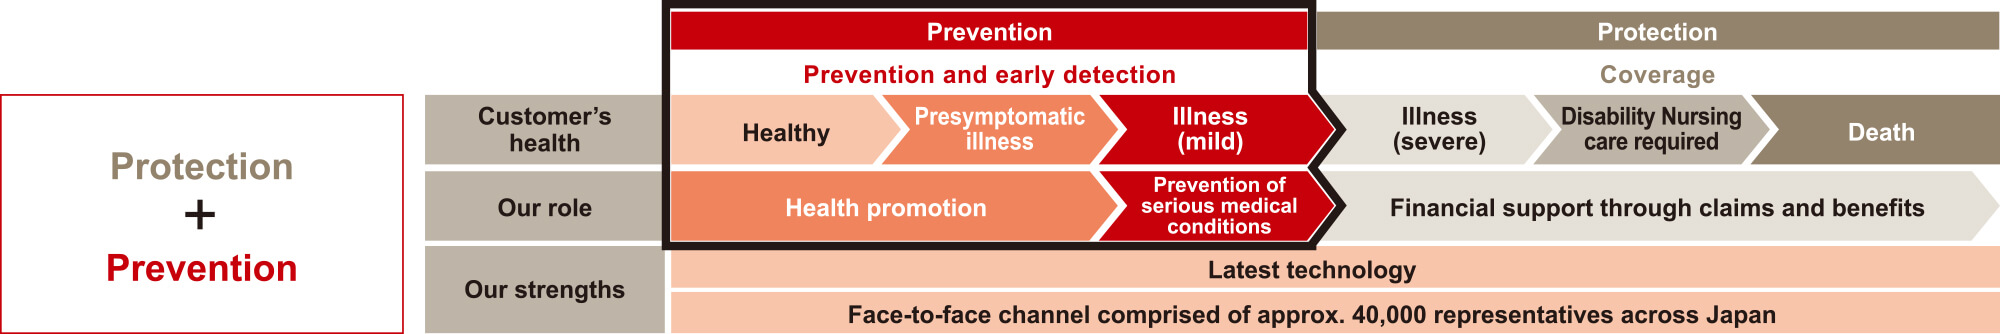 figure: Protection + Prevention